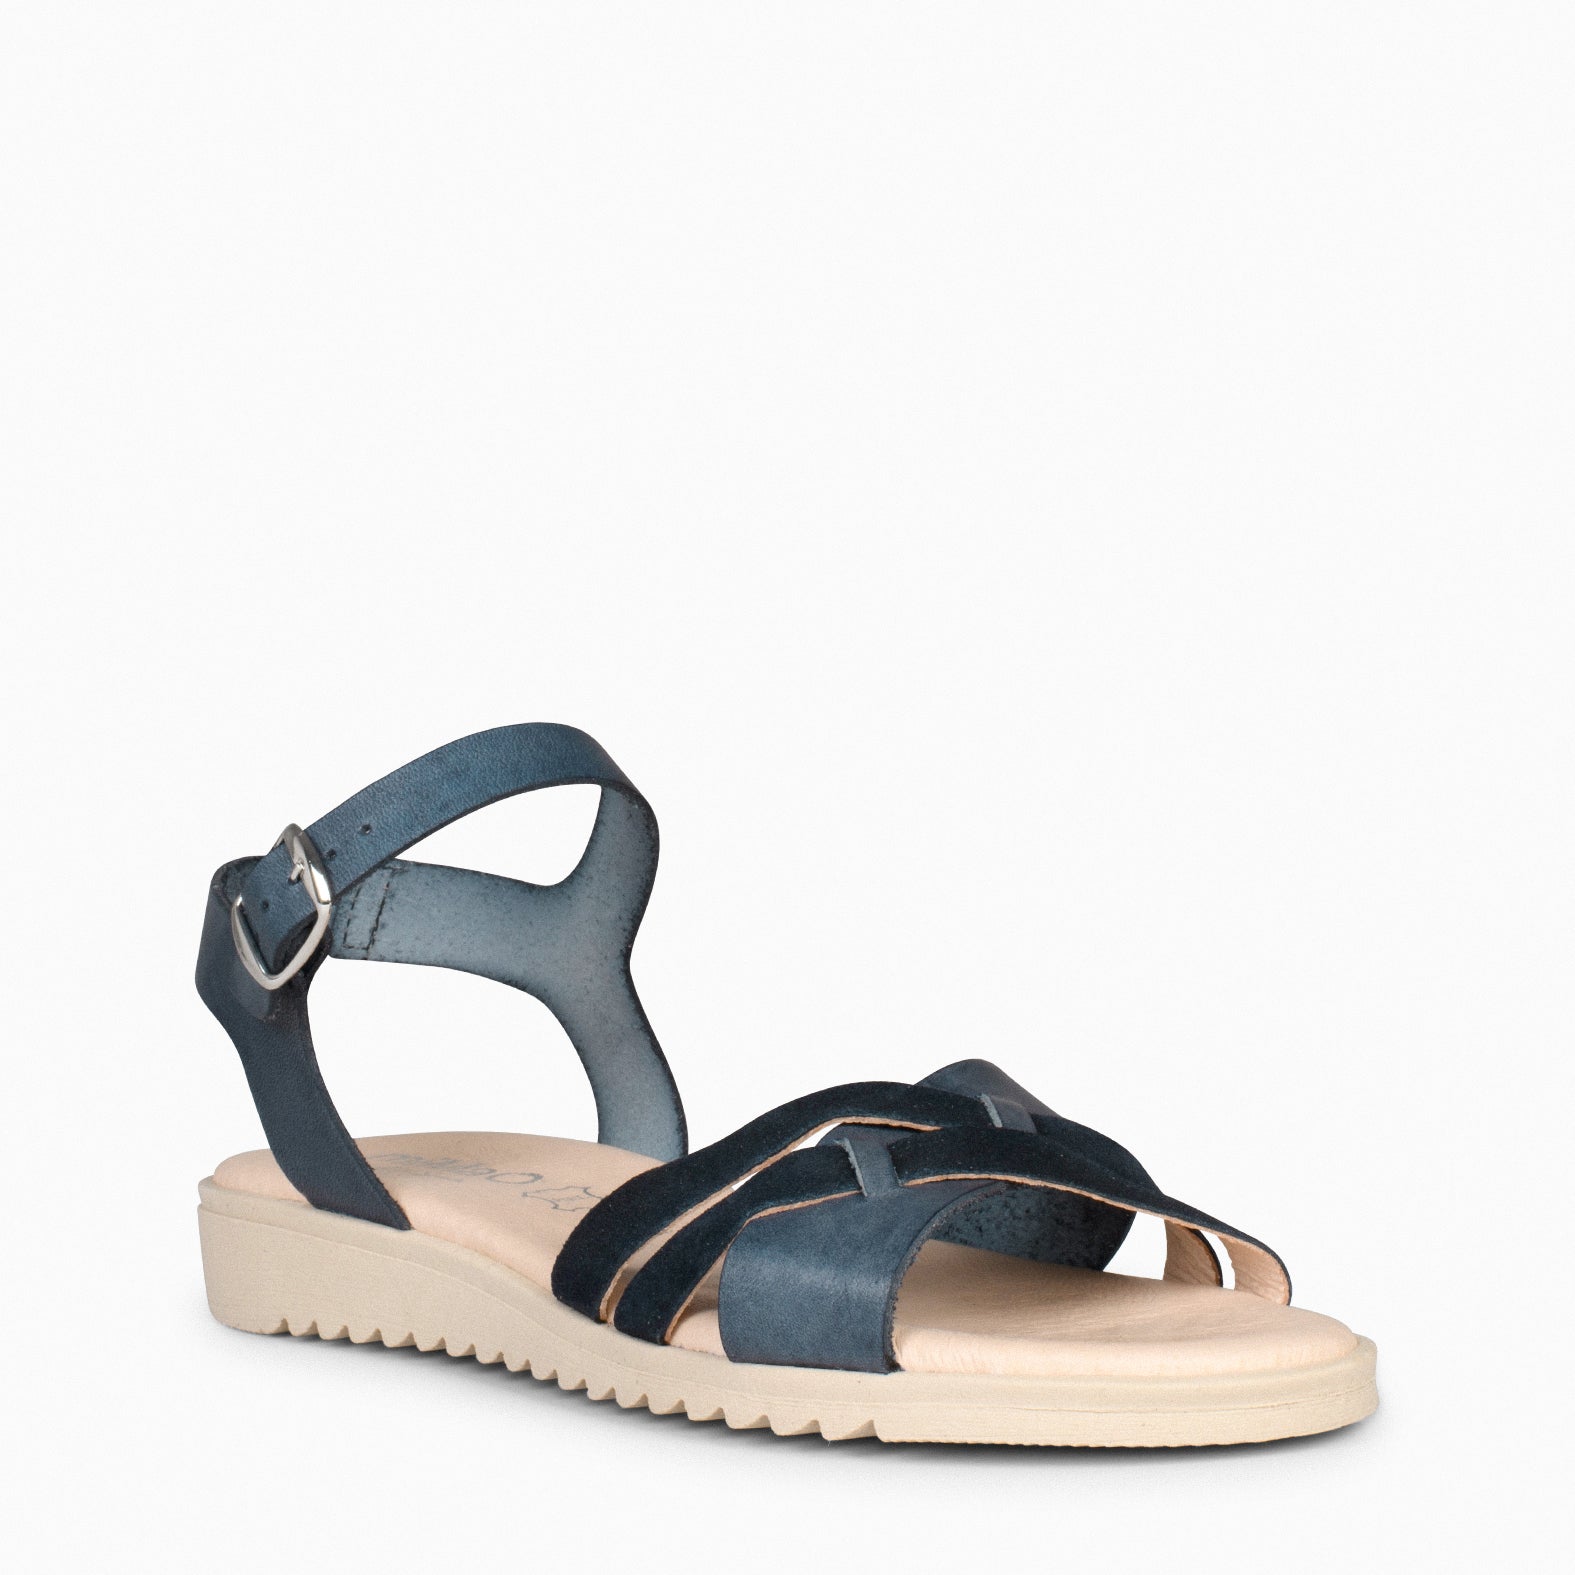 FRESH – NAVY low wedge leather sandals